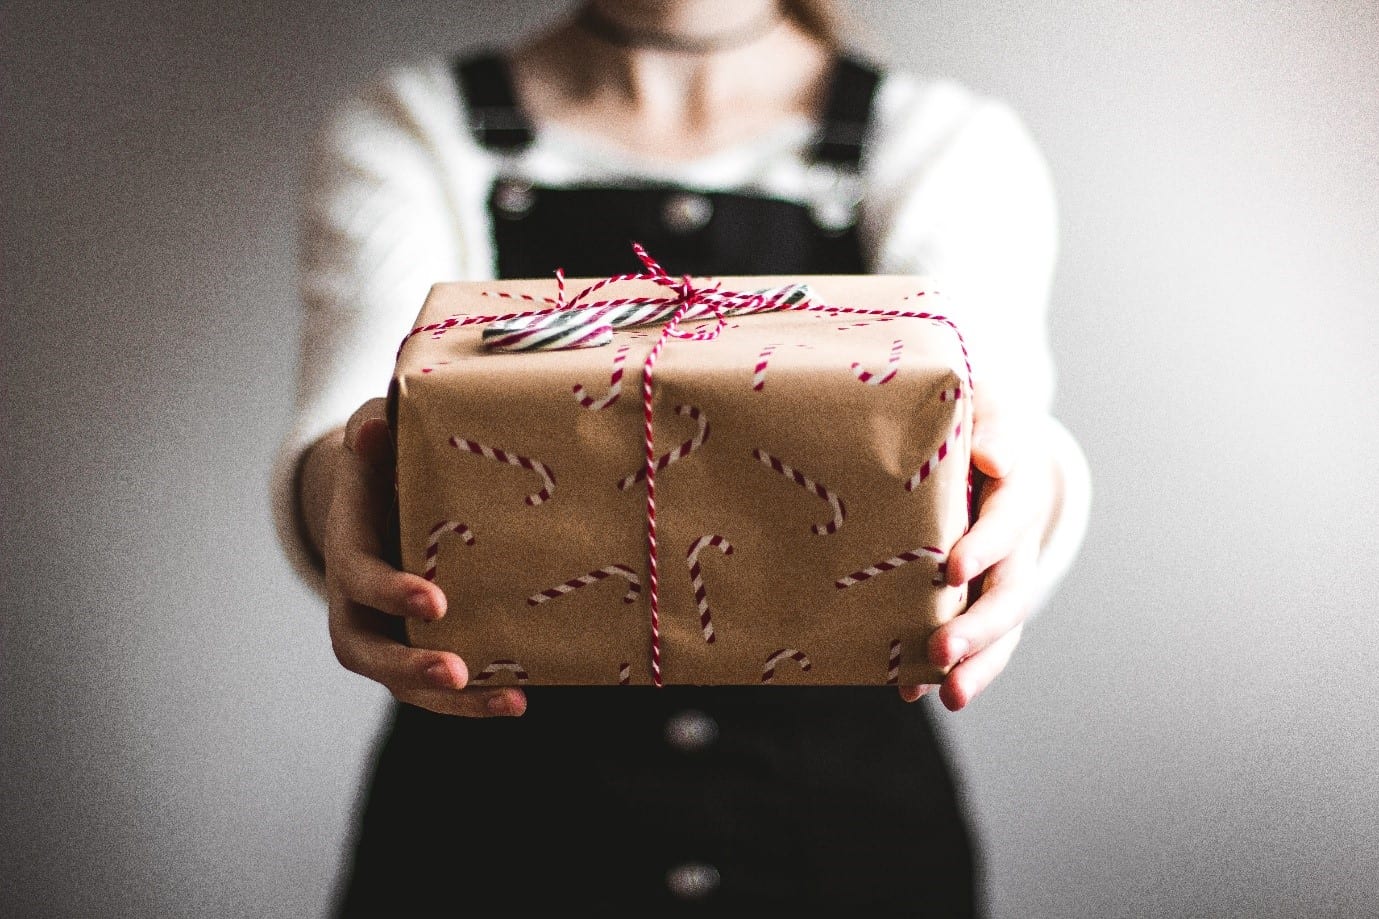 5 TOP TIPS FOR CORPORATE GIFT GIVING THIS FESTIVE SEASON